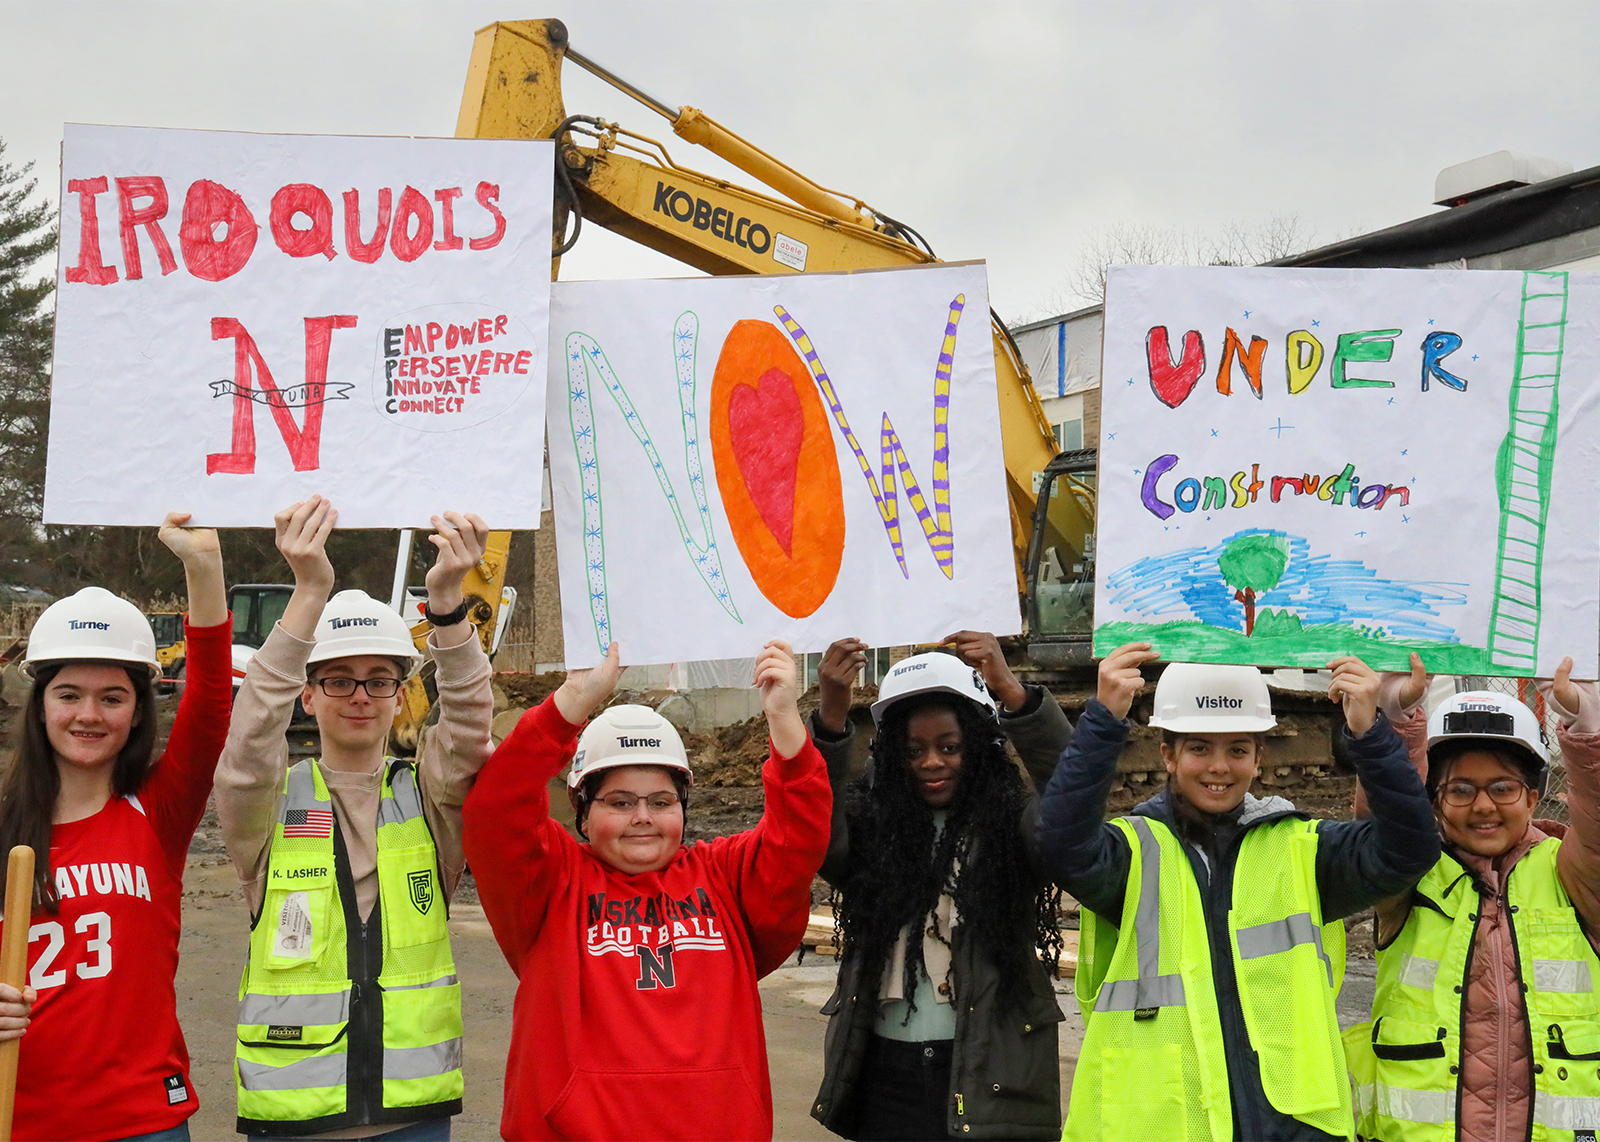 students, superintendent and principals at capital project site holding sings that say Iroquois now under construction